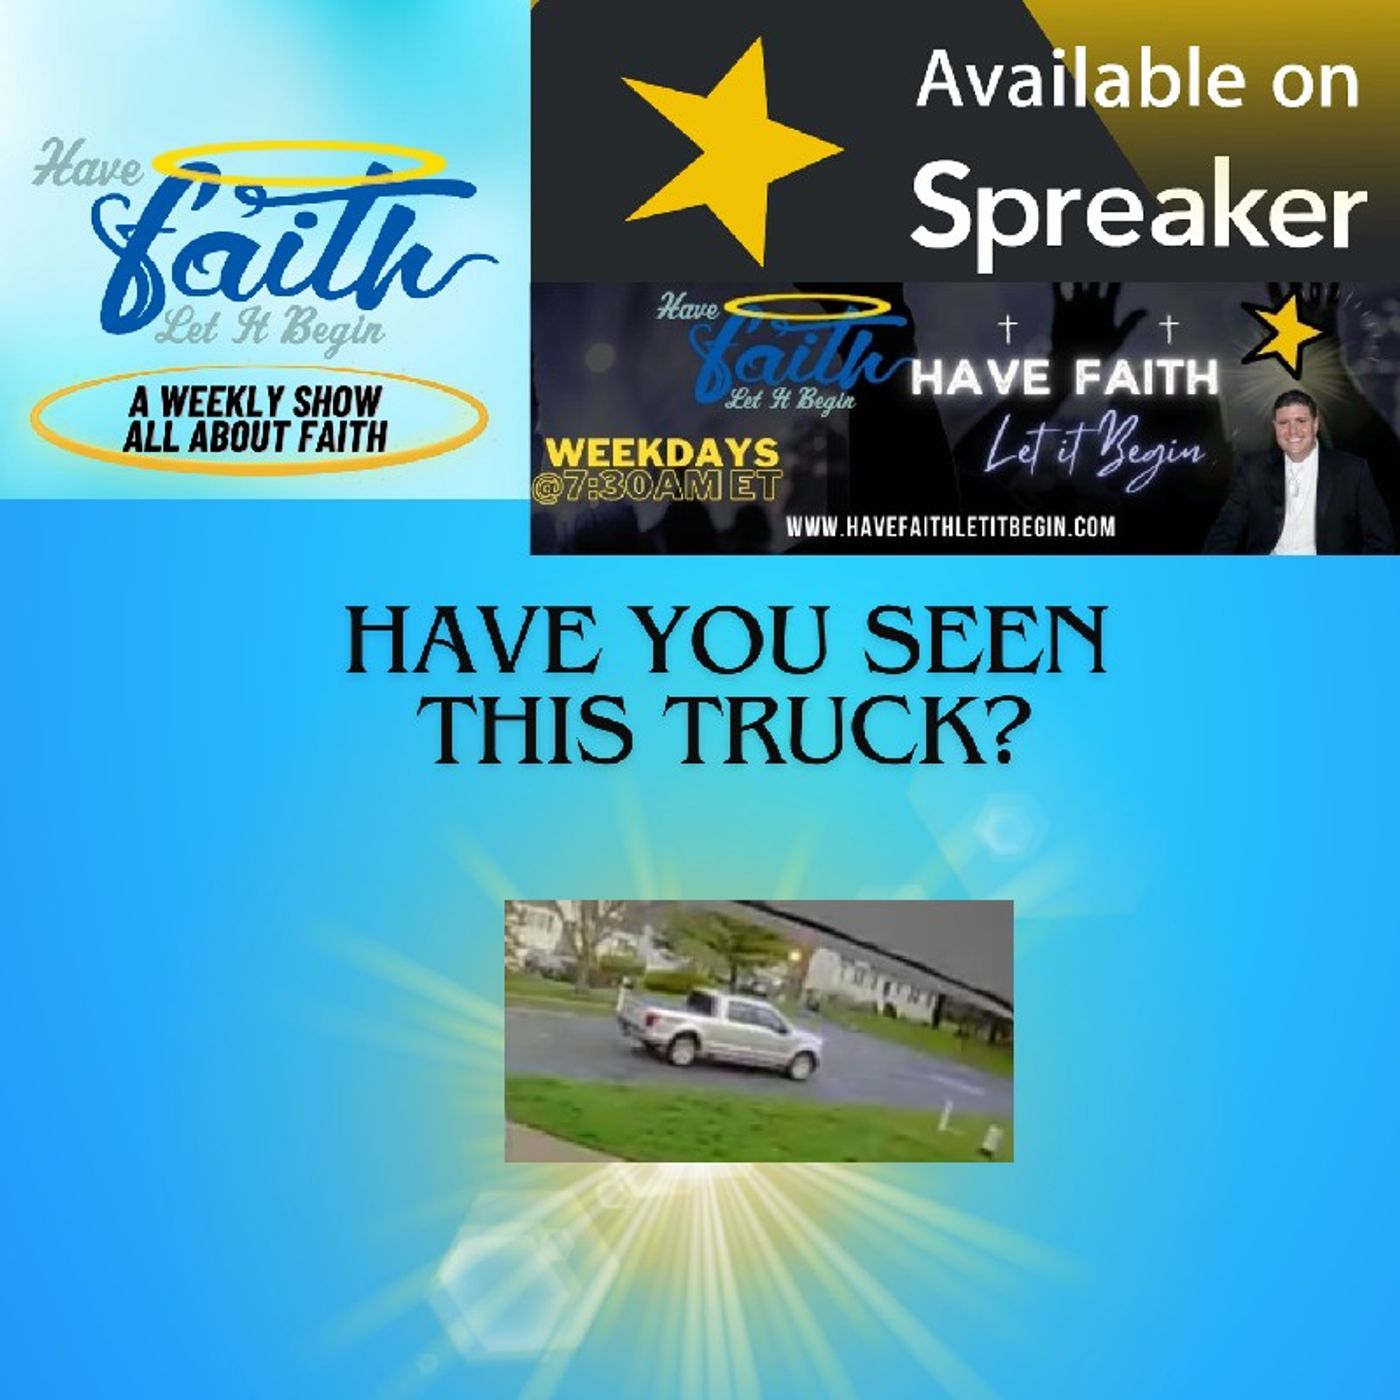 Have you seen this truck before?